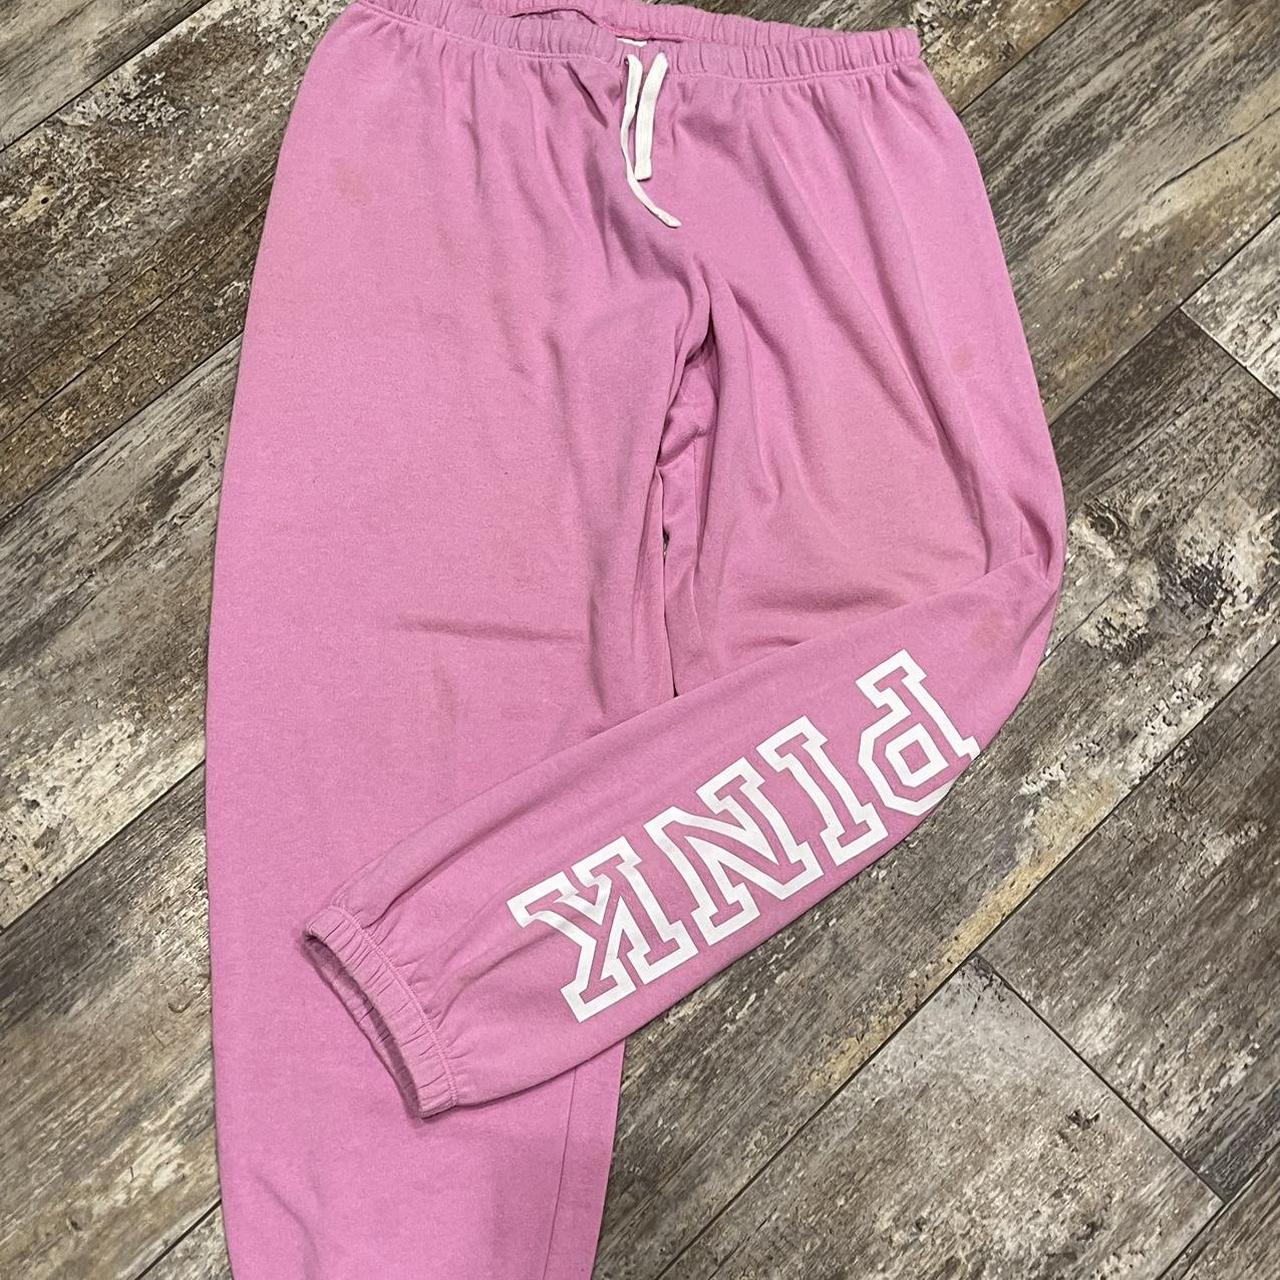 Victorias Secret Pink sweats small stain shown in pic - Depop